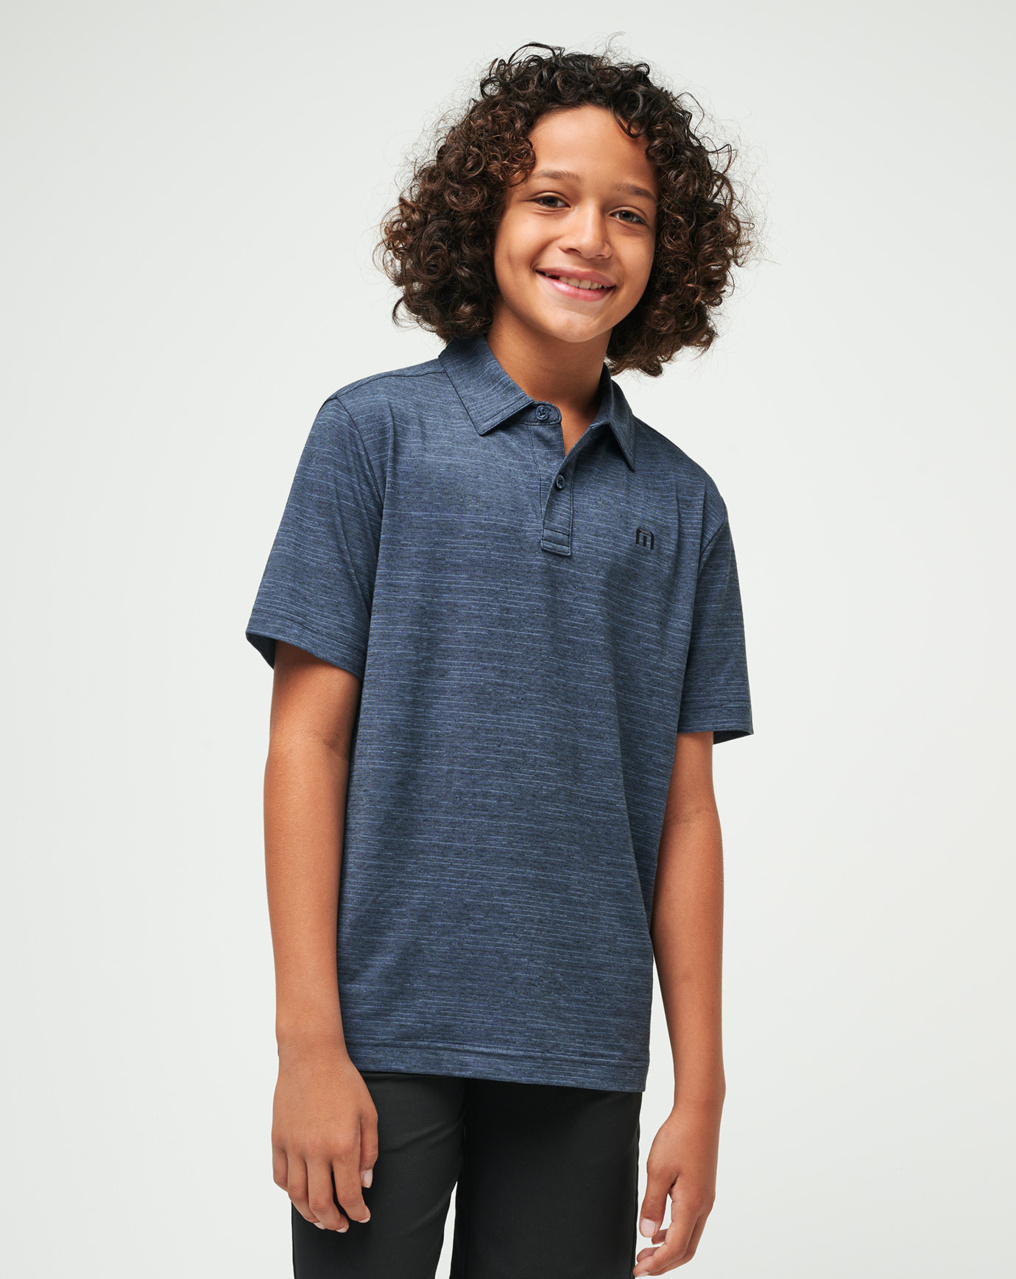 THE HEATER YOUTH POLO 1